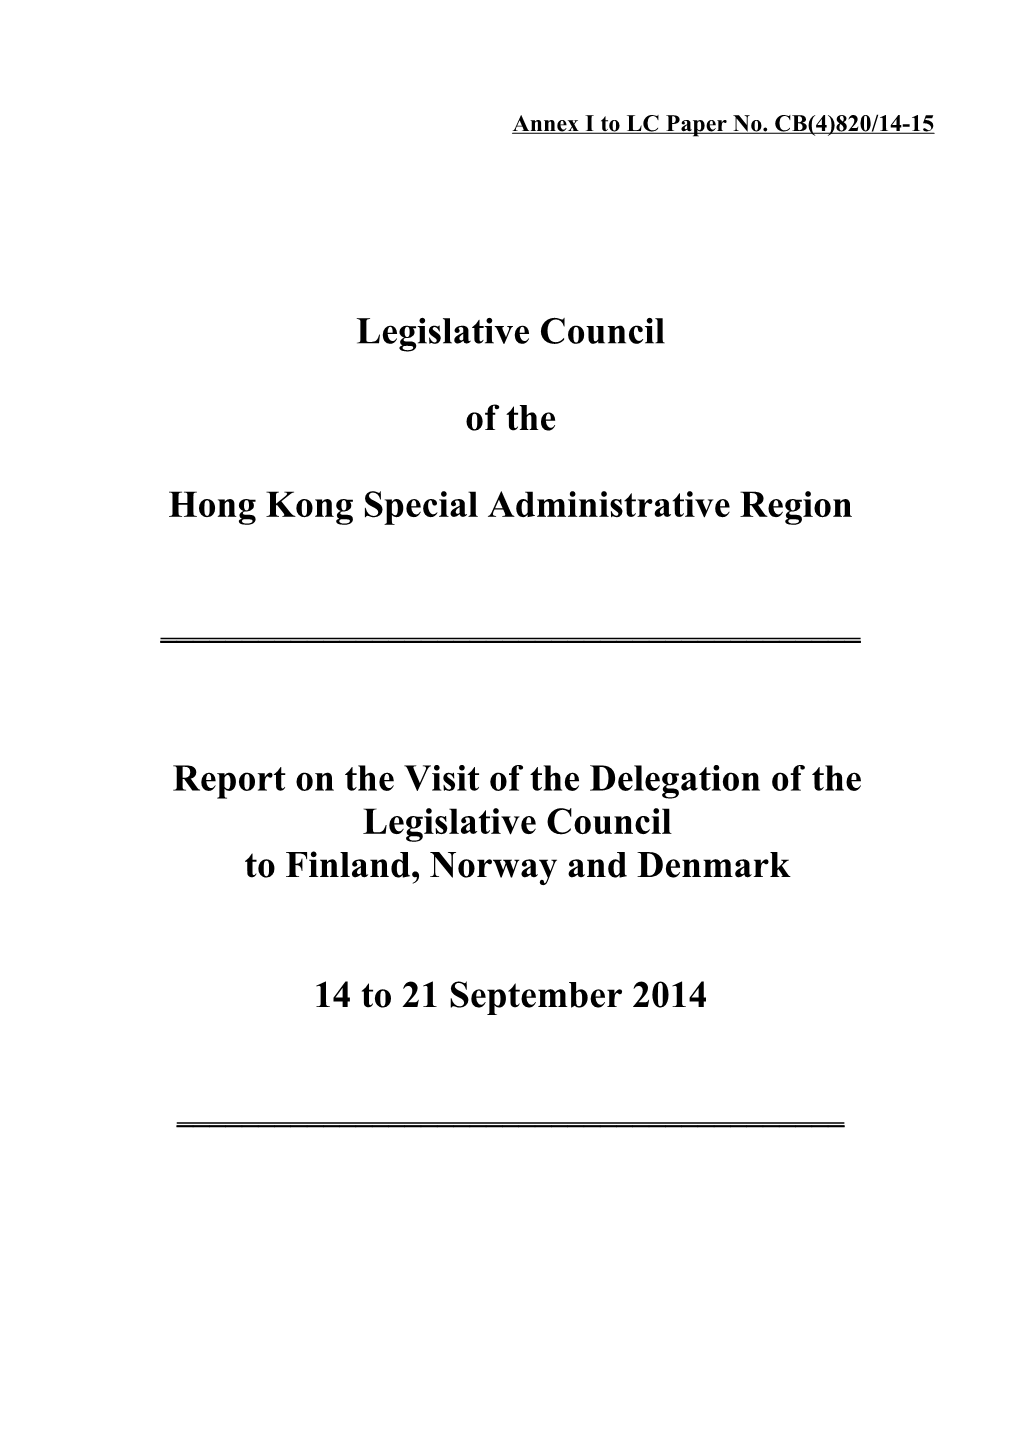 Report on the Visit of the Delegation of the Legislative Council to Finland, Norway and Denmark